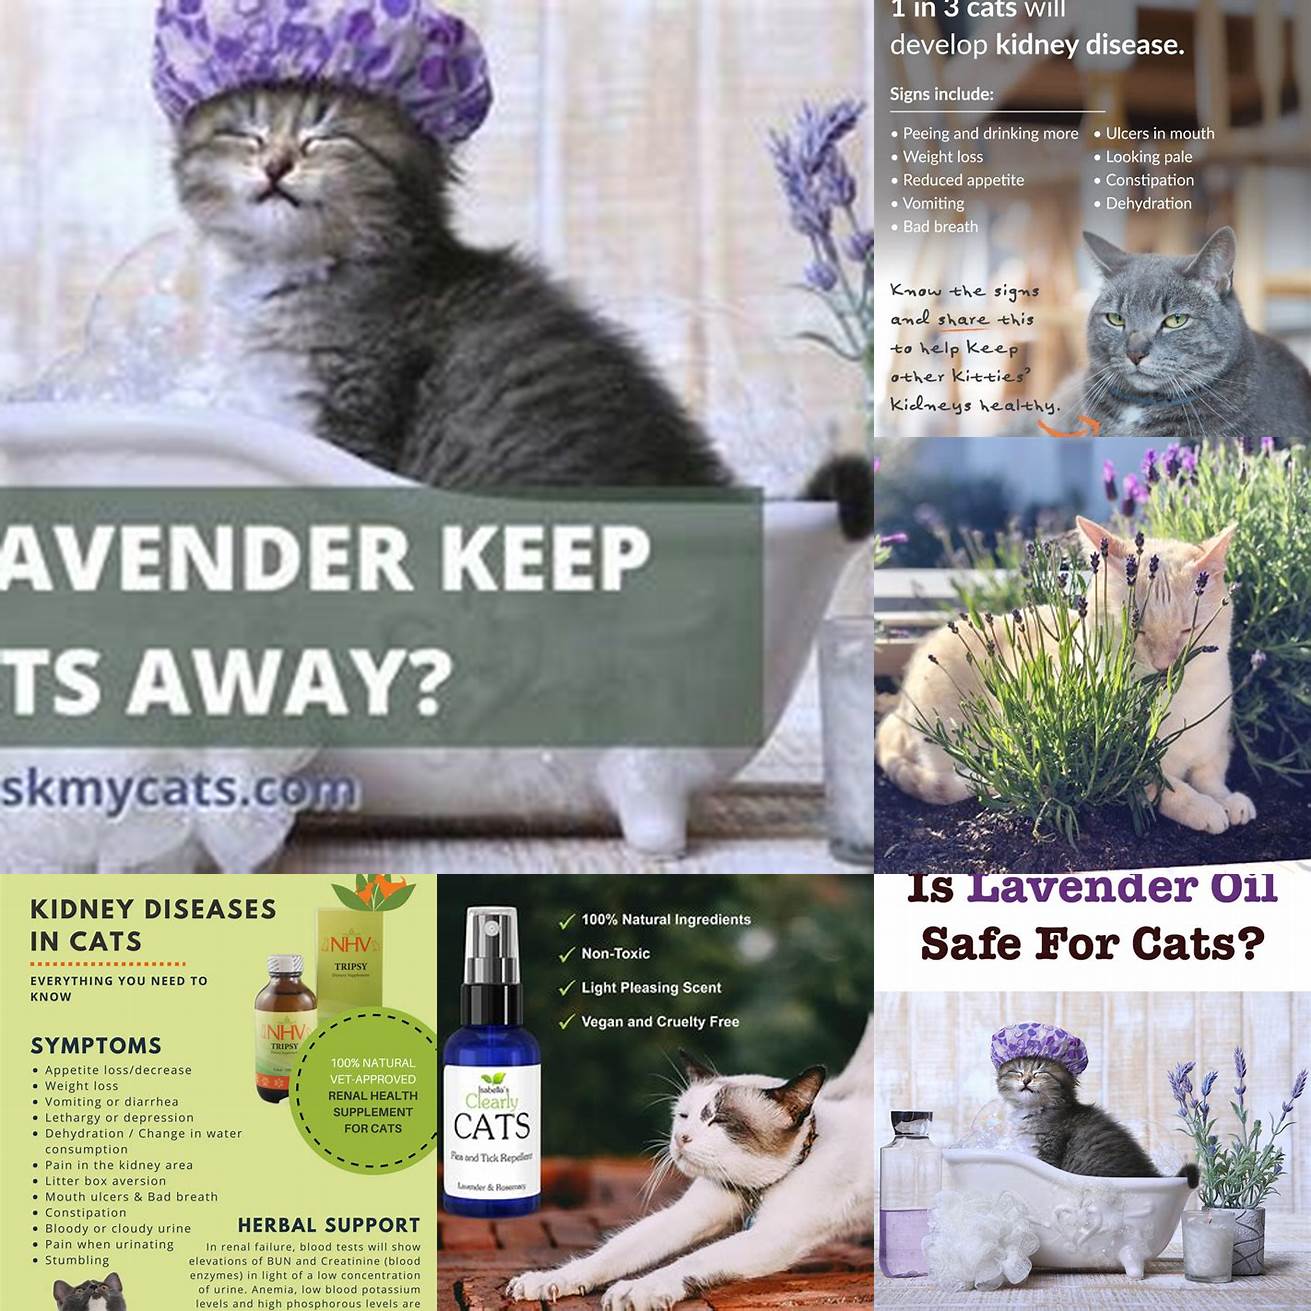 Do not use lavender products on cats with liver or kidney problems